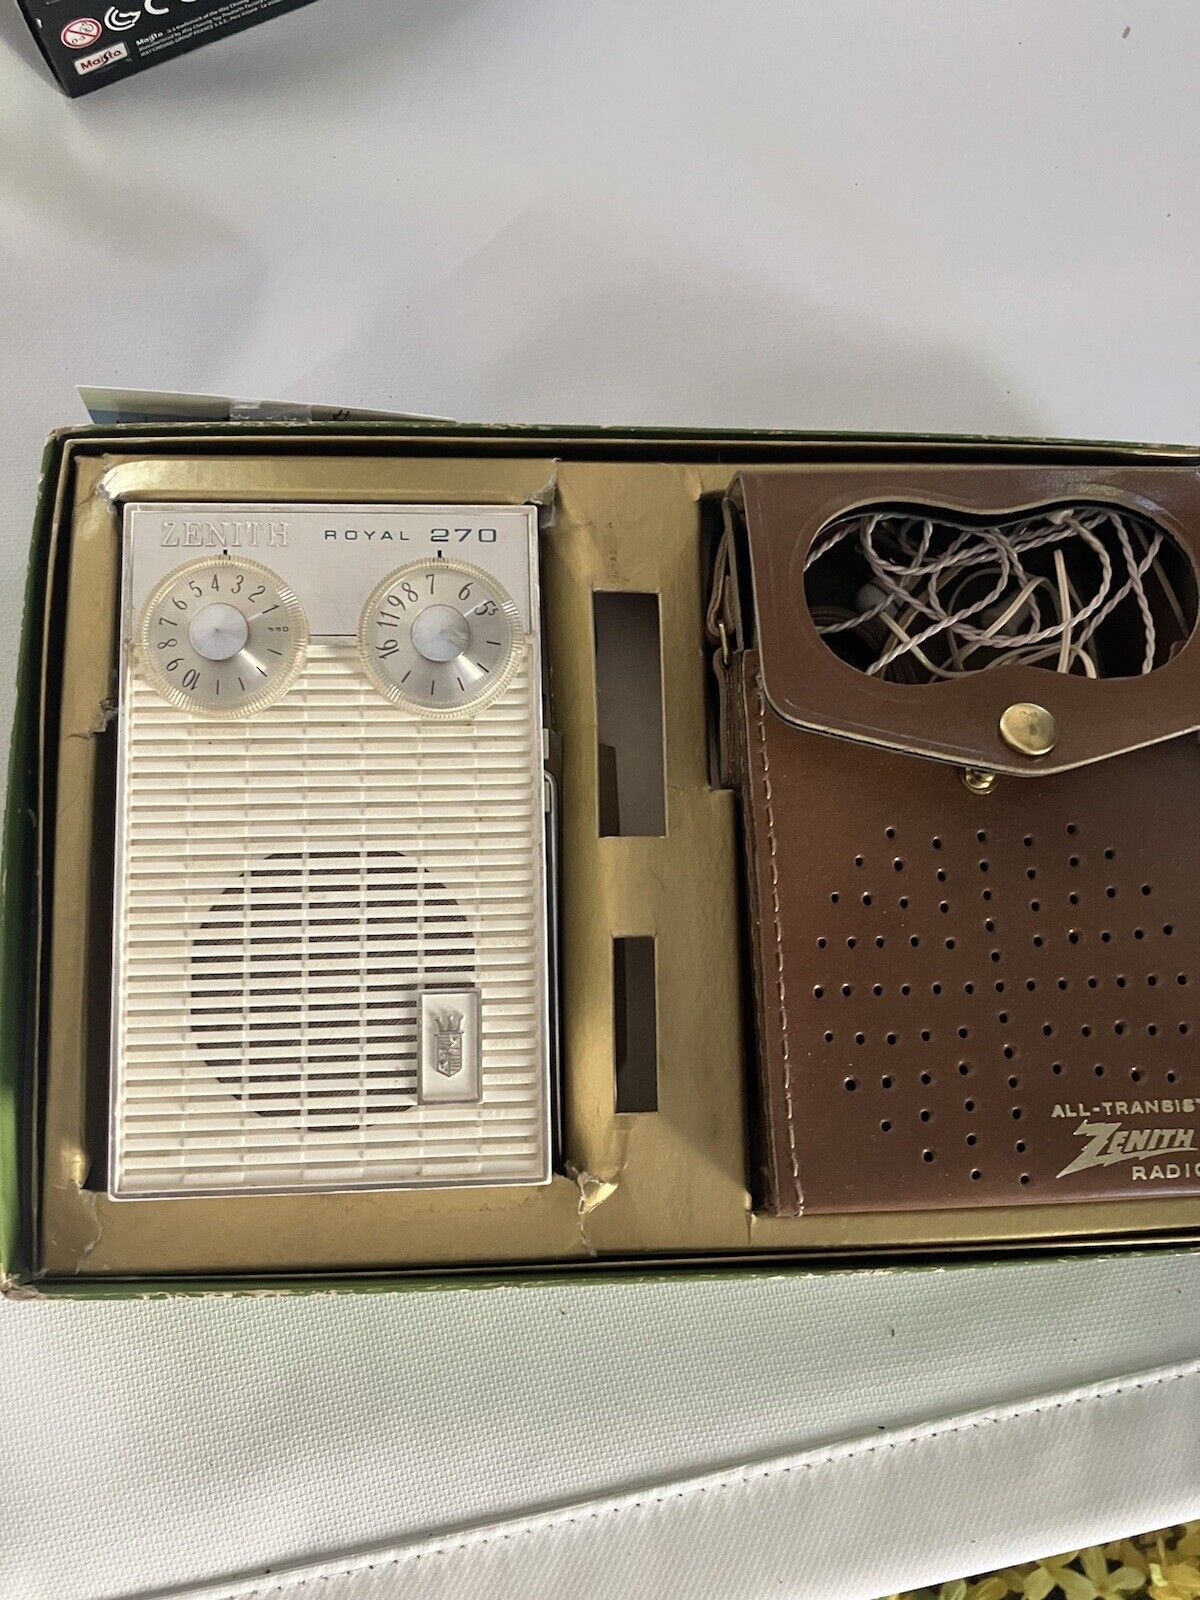 Zenith Royal 270 Transitor Radio with Case. Working well.